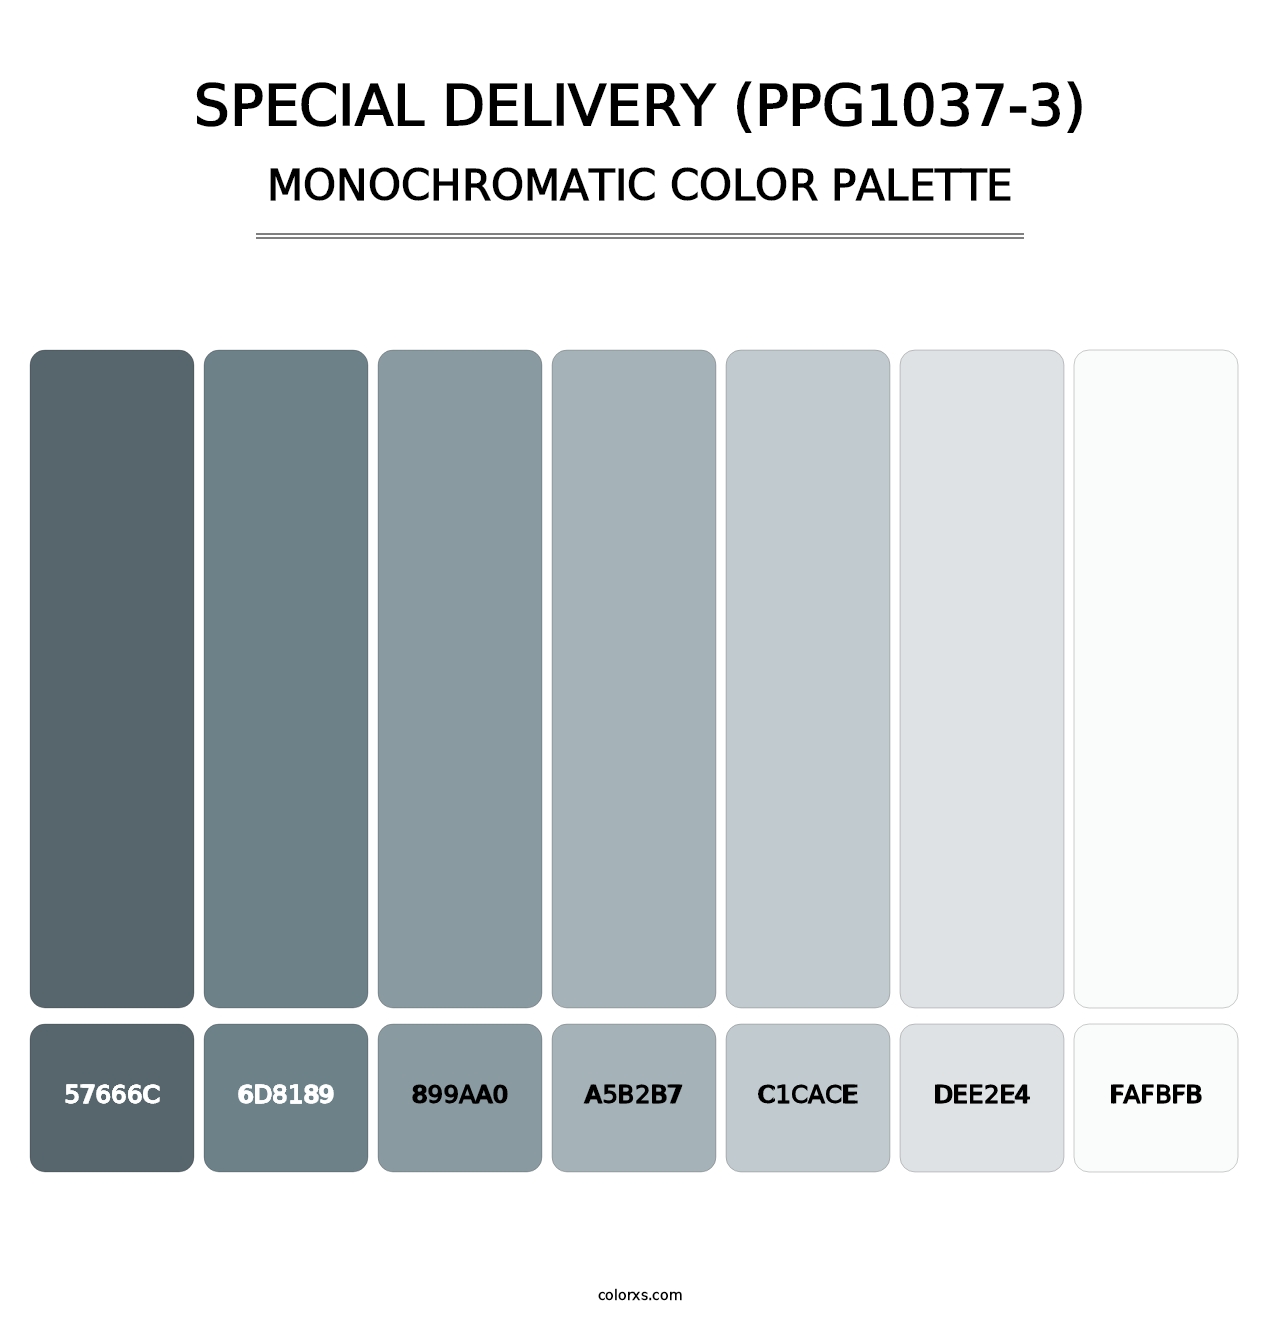 Special Delivery (PPG1037-3) - Monochromatic Color Palette